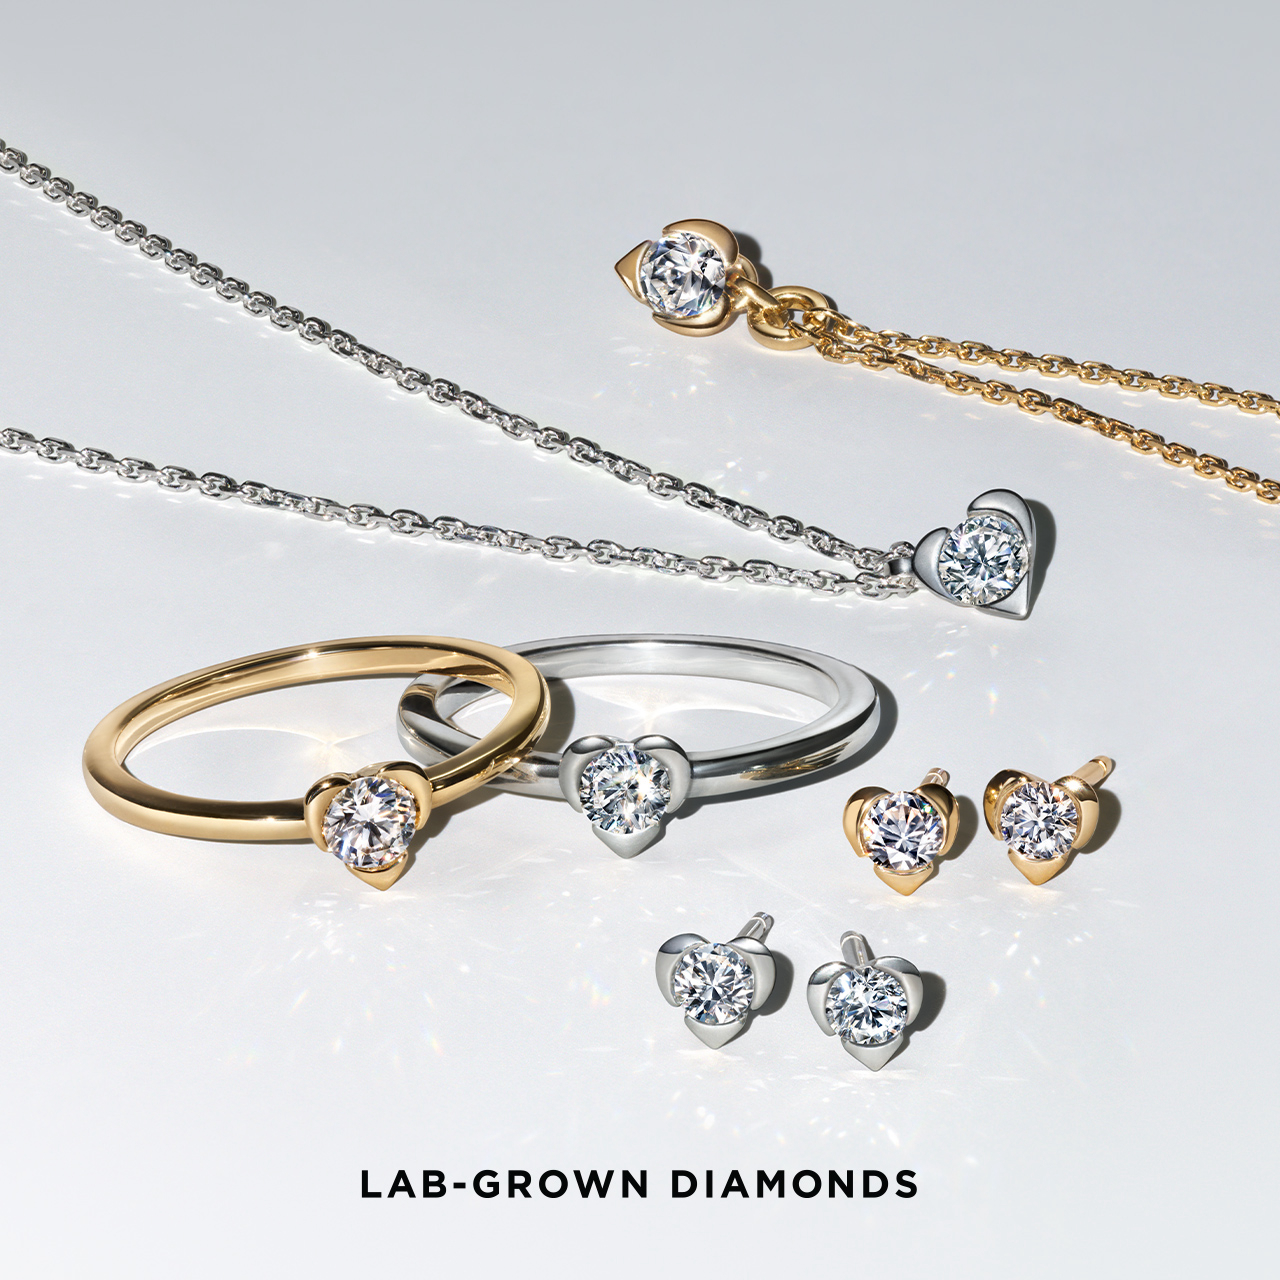 Pandora Campaign 134 For all the love she gives. Diamonds for all mothers. EN 1280x1280 1